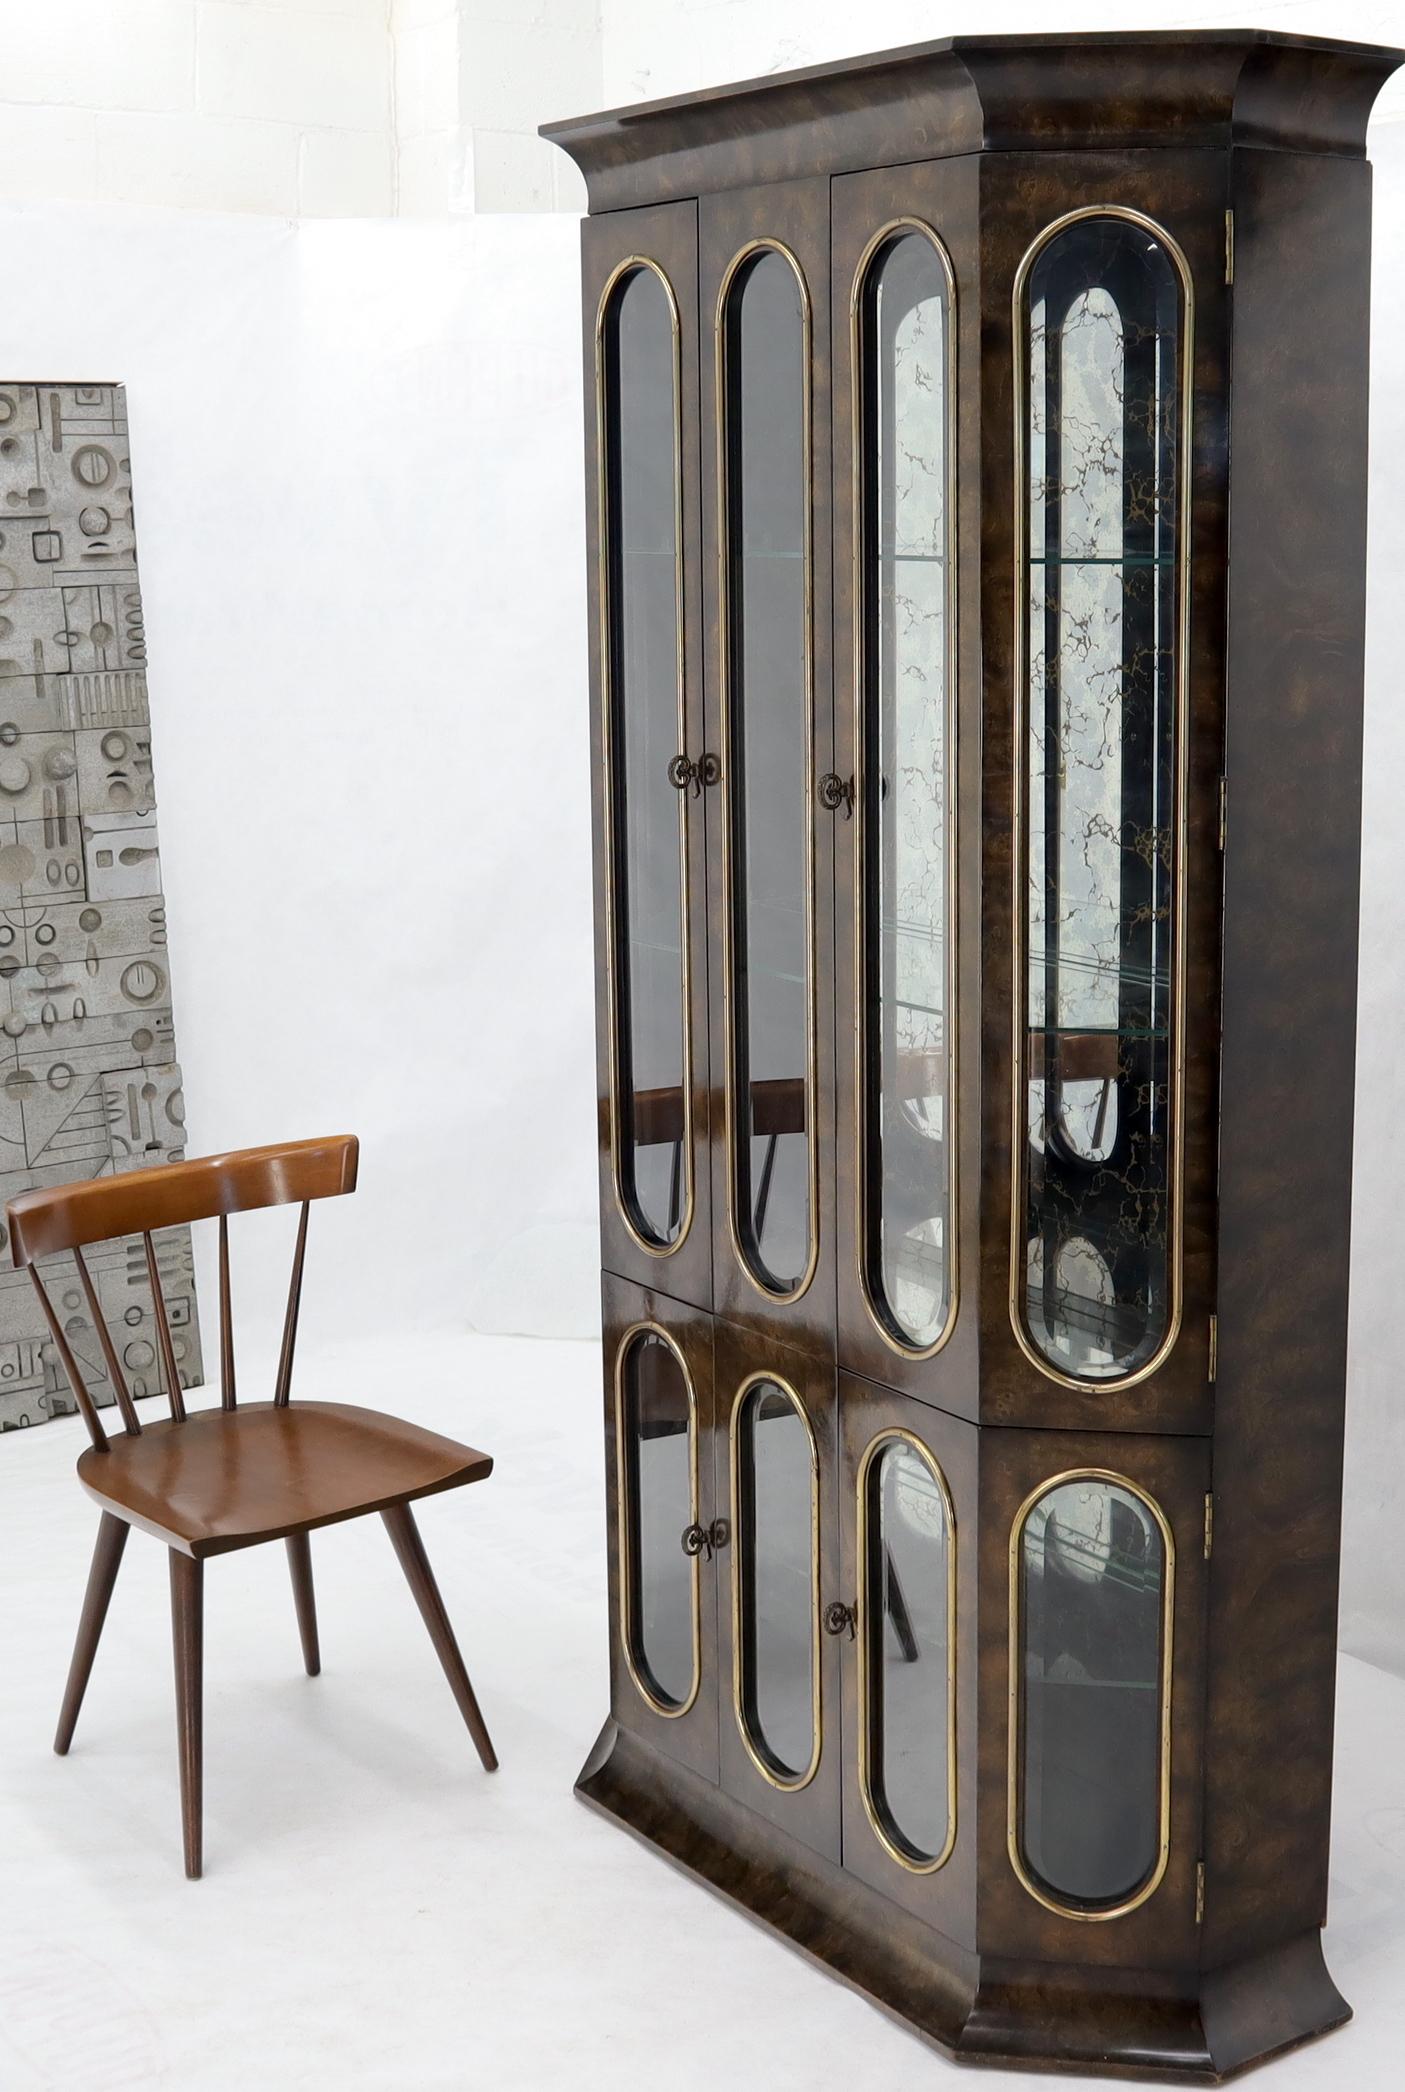 Mid-Century Modern tall tower shape breakfront by
Mastercraft. Brass trim, burl wood, beveled glass, and other high quality craftsmanship details. 
 